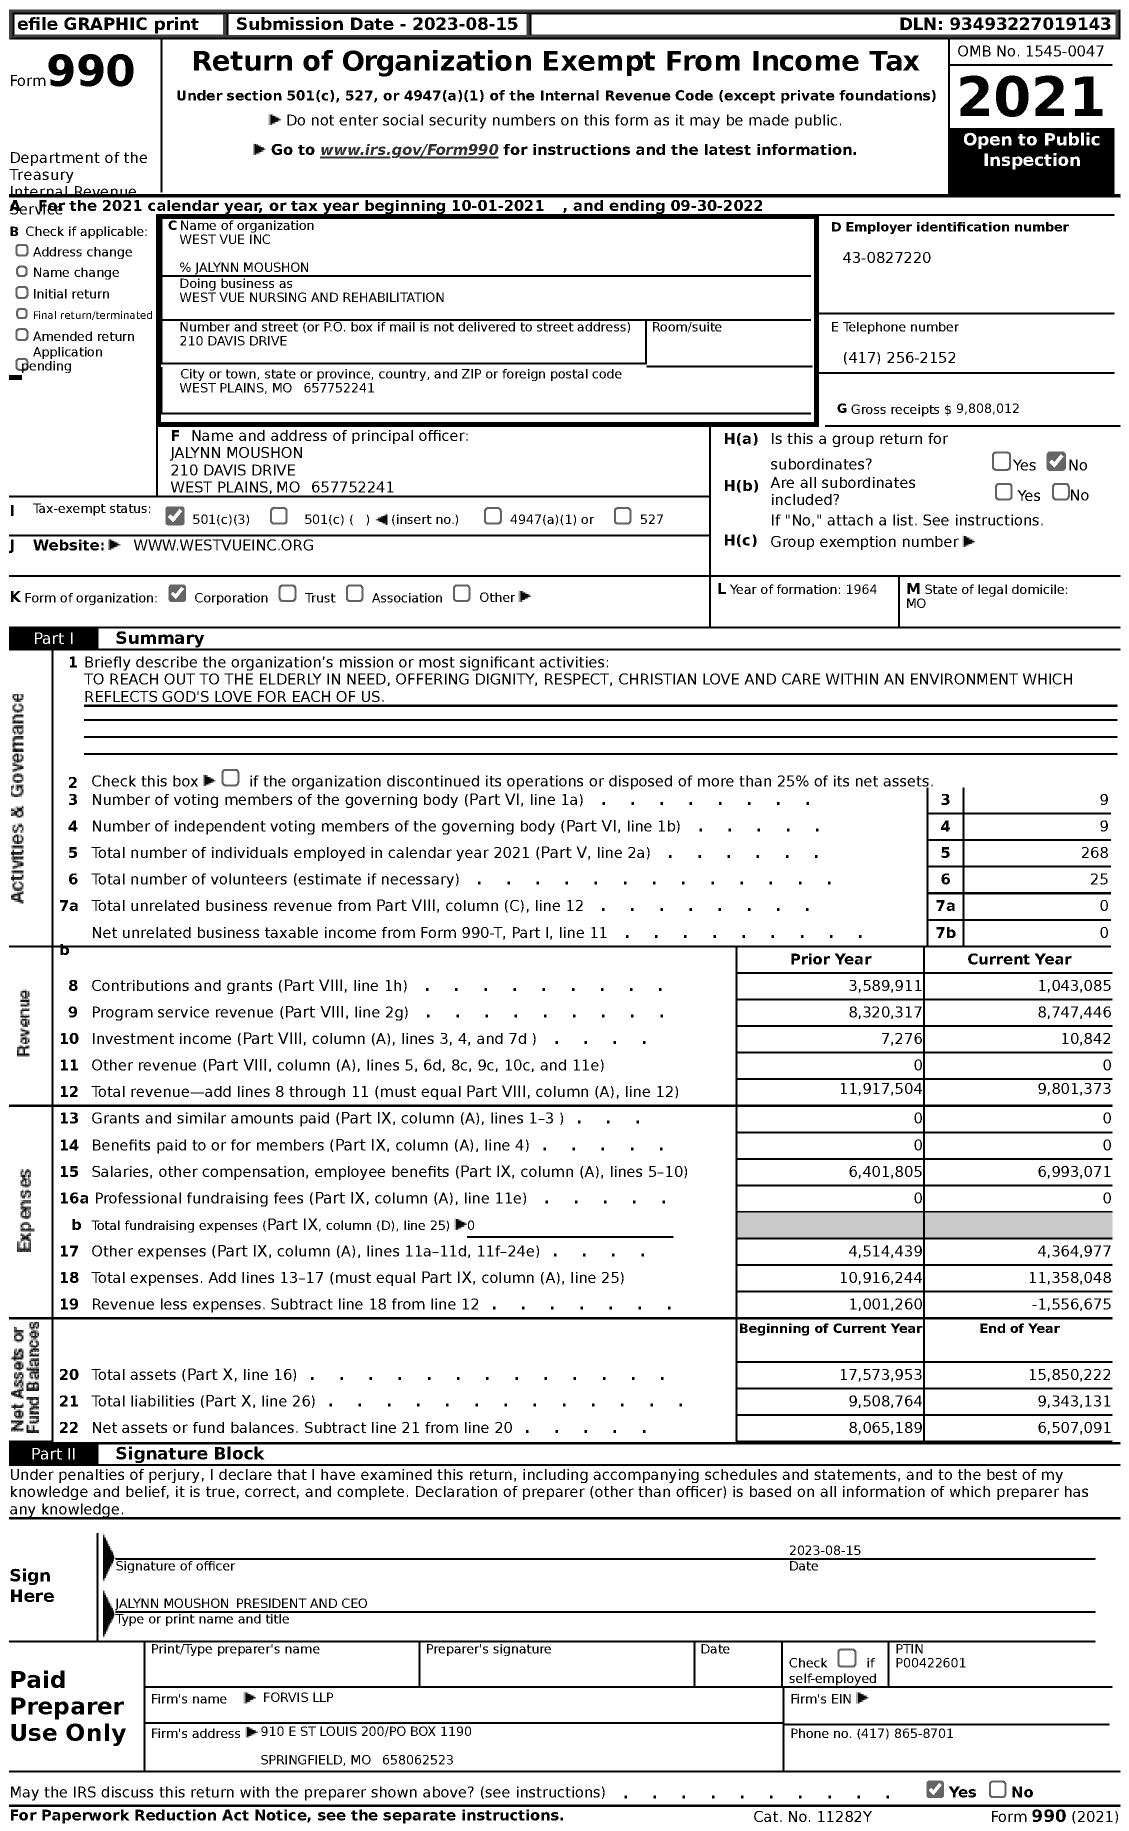 Image of first page of 2021 Form 990 for West Vue Nursing and Rehabilitation (WVI)